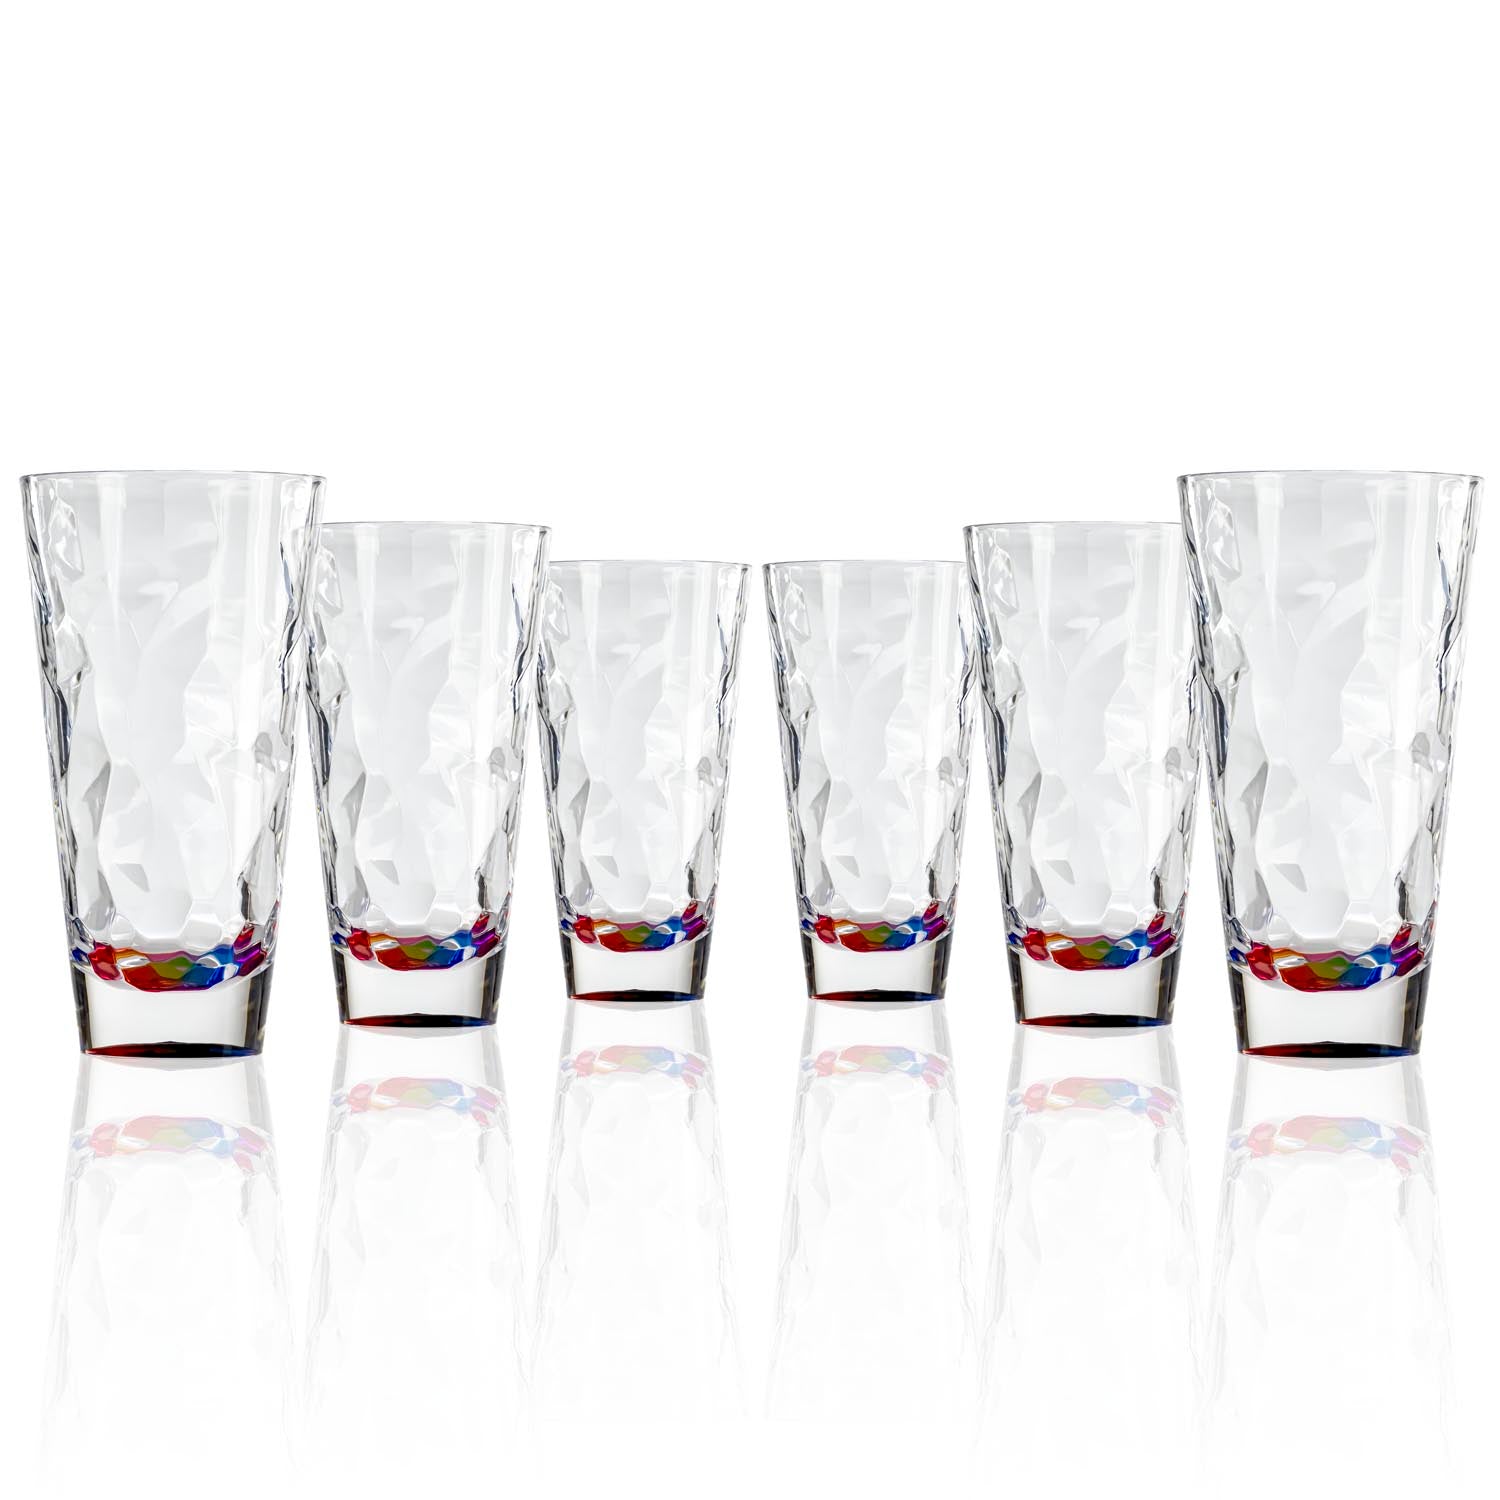 Set of 6, 17-ounce rainbow acrylic tumbler glasses from the Merritt Designs Cascade collection. Front view on white background